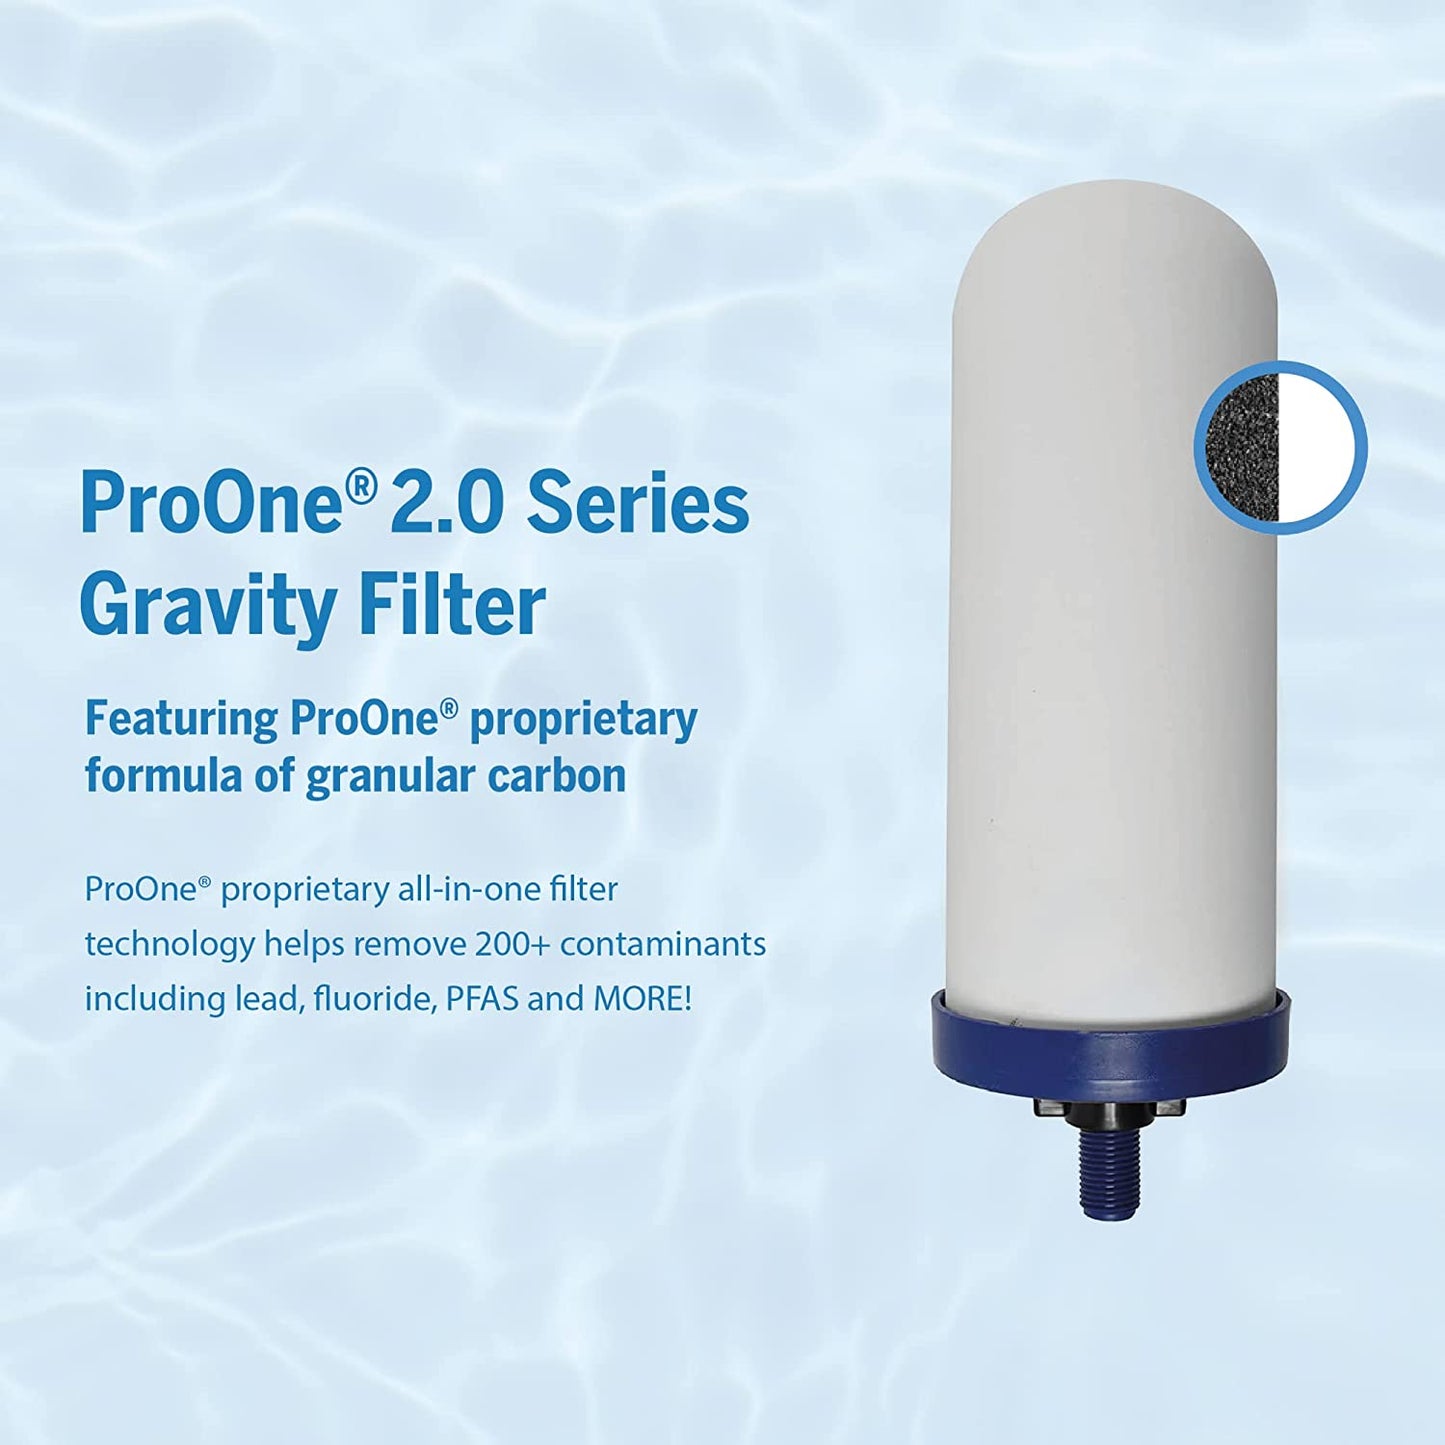 ProOne Big+ Stainless-Steel Gravity Water Filter System, 3-Gallon Water Capacity, Countertop Water Dispenser for Home, Camping, and Travel with 7 inches Filter